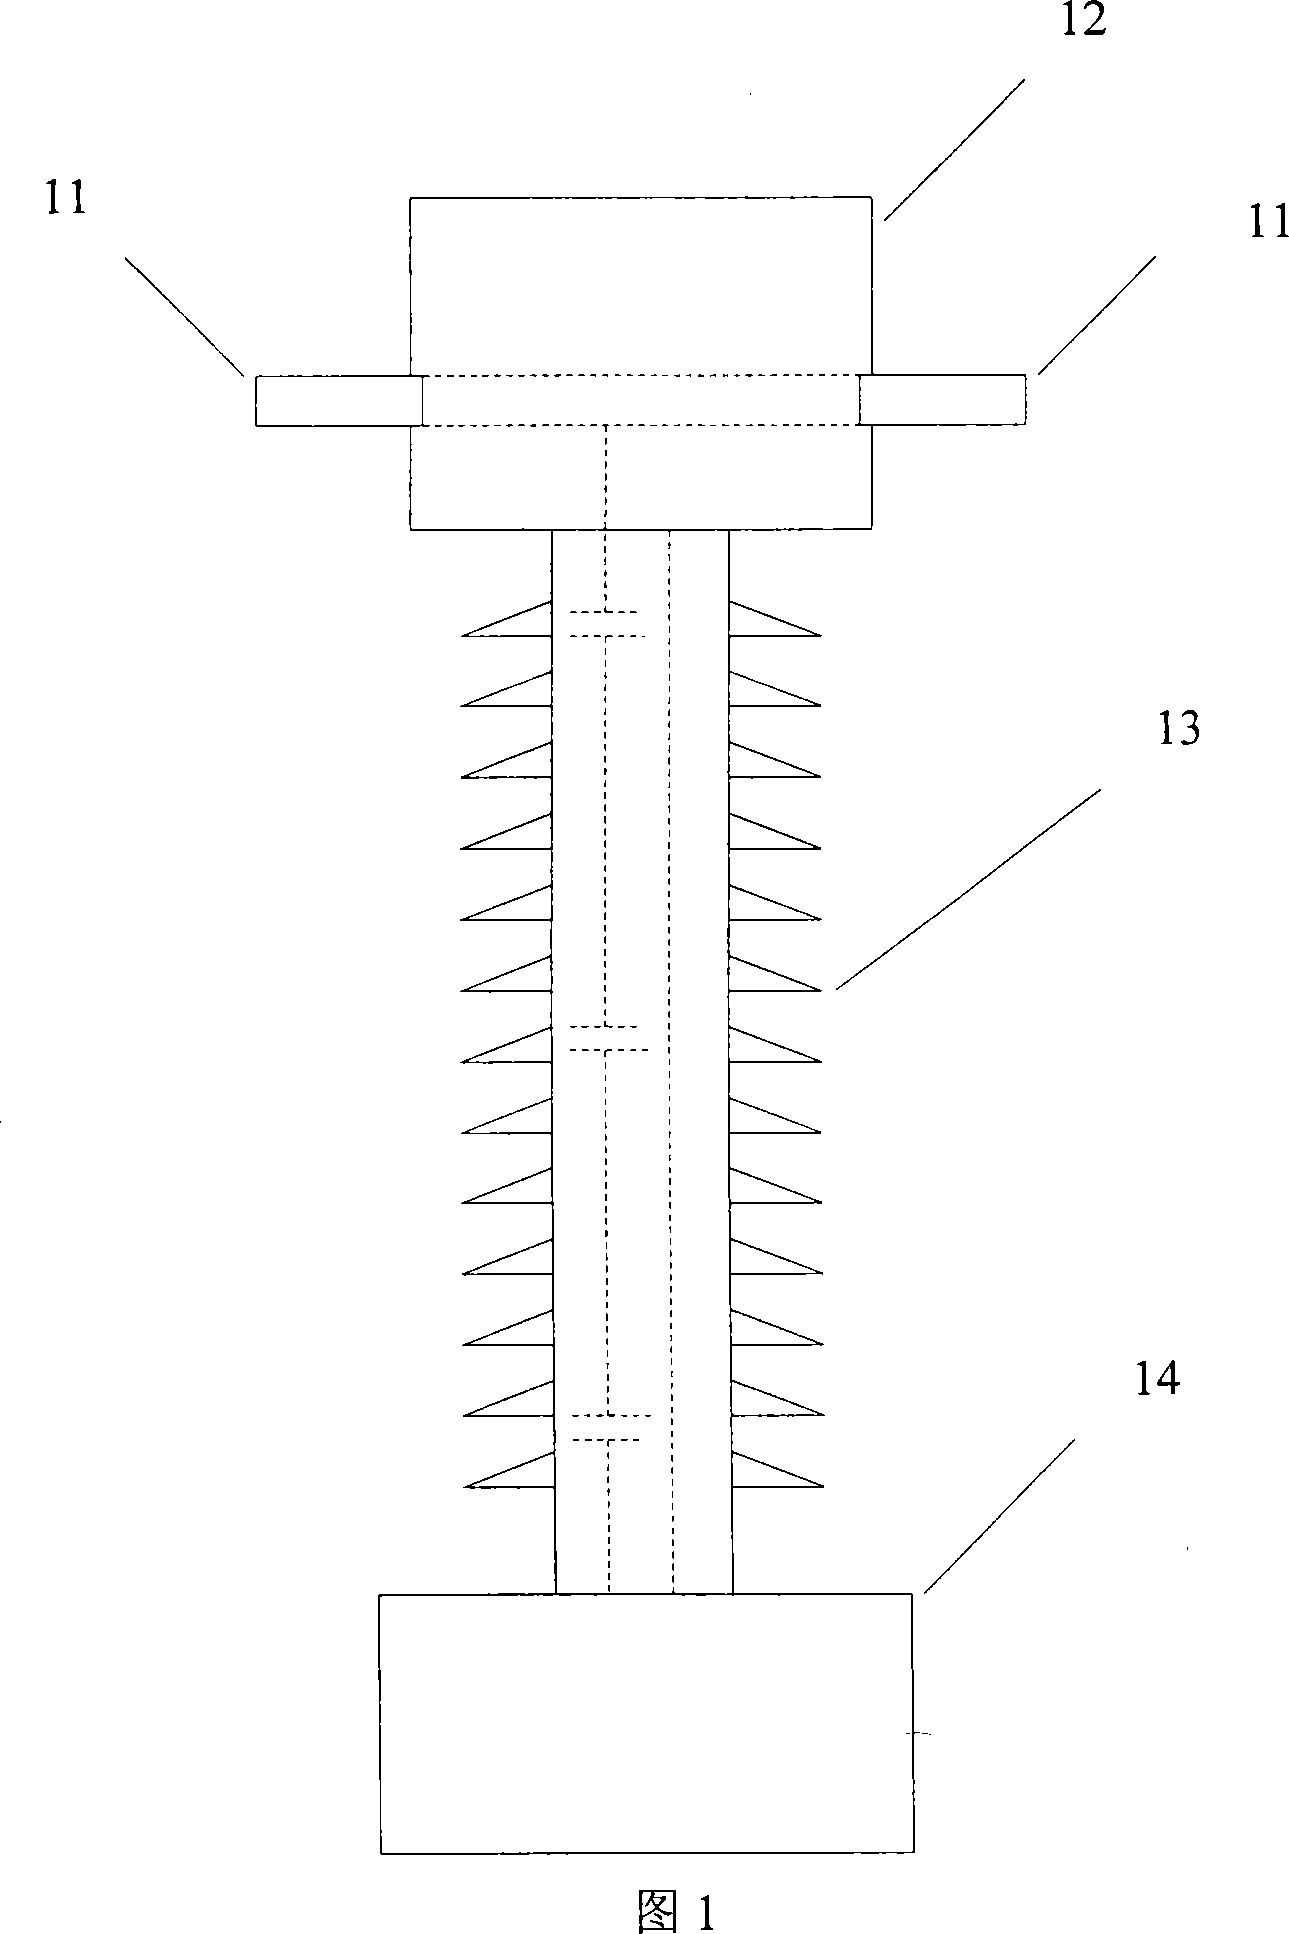 Single-phase electric energy mutual-inductor